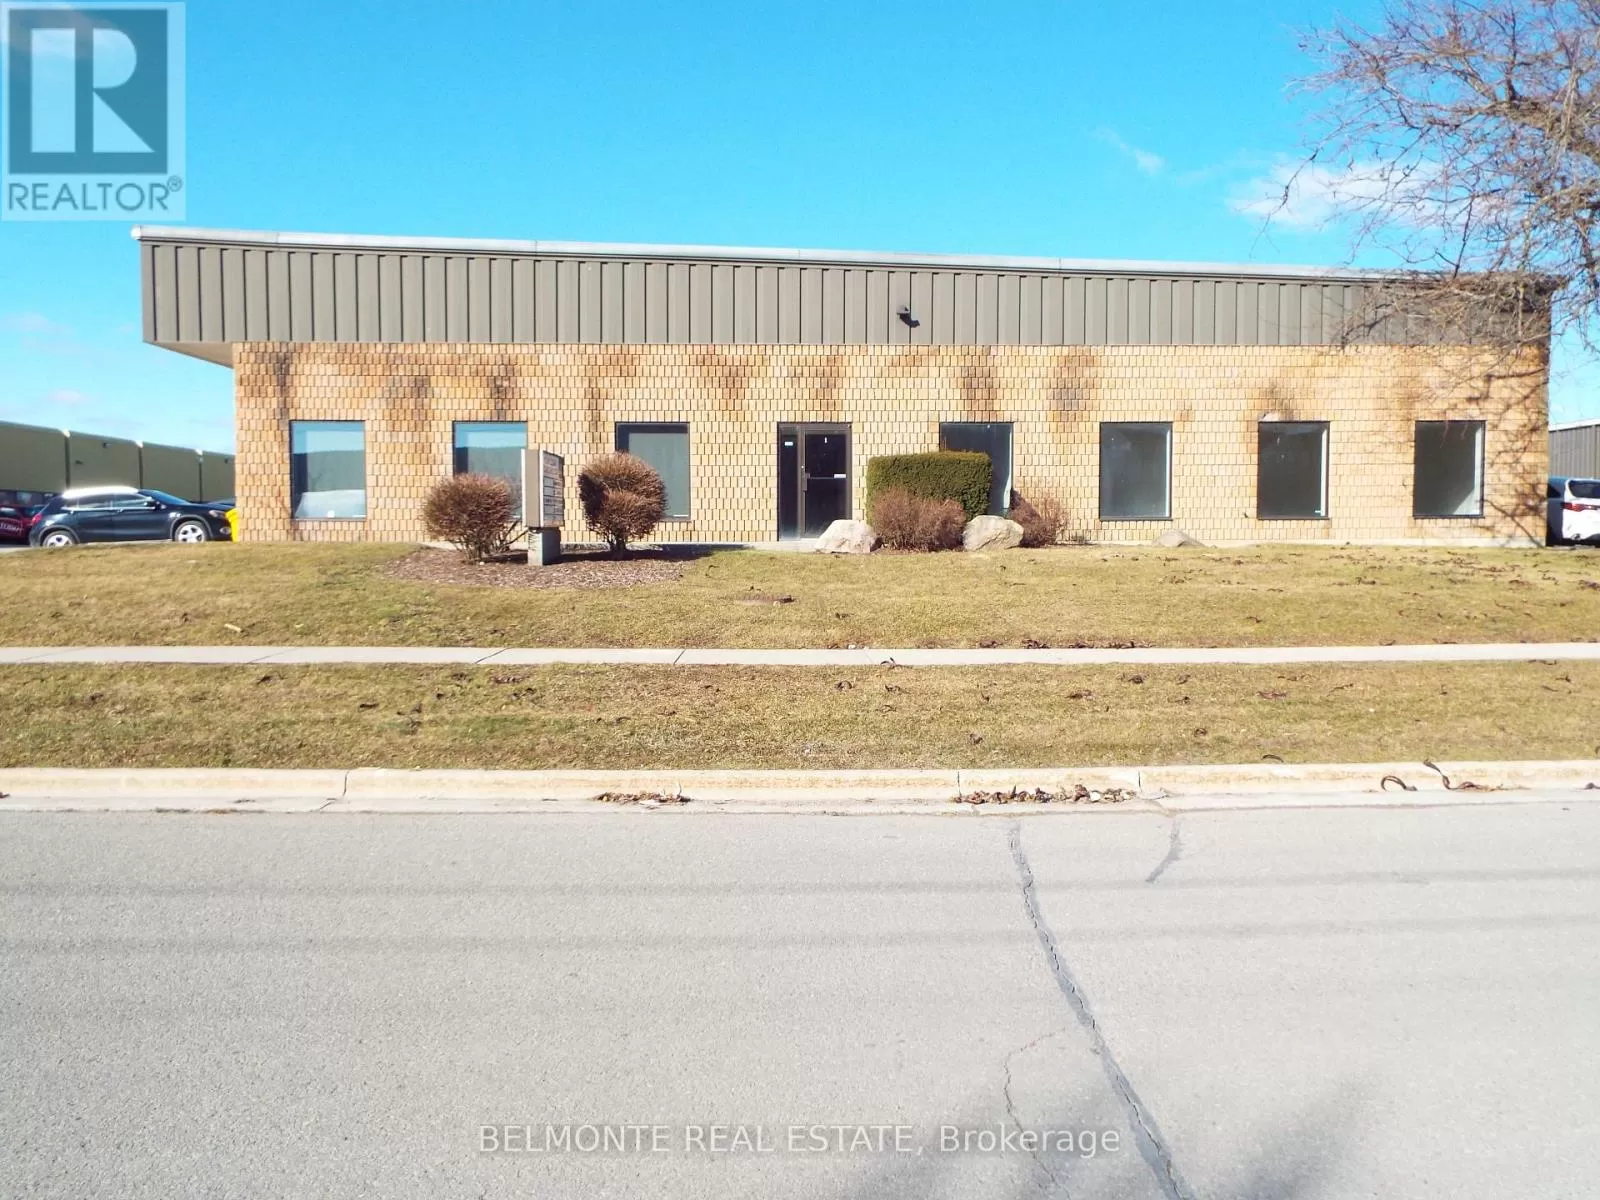 Offices for rent: #1 -1260 Terwillegar Ave, Oshawa, Ontario L1J 7A5